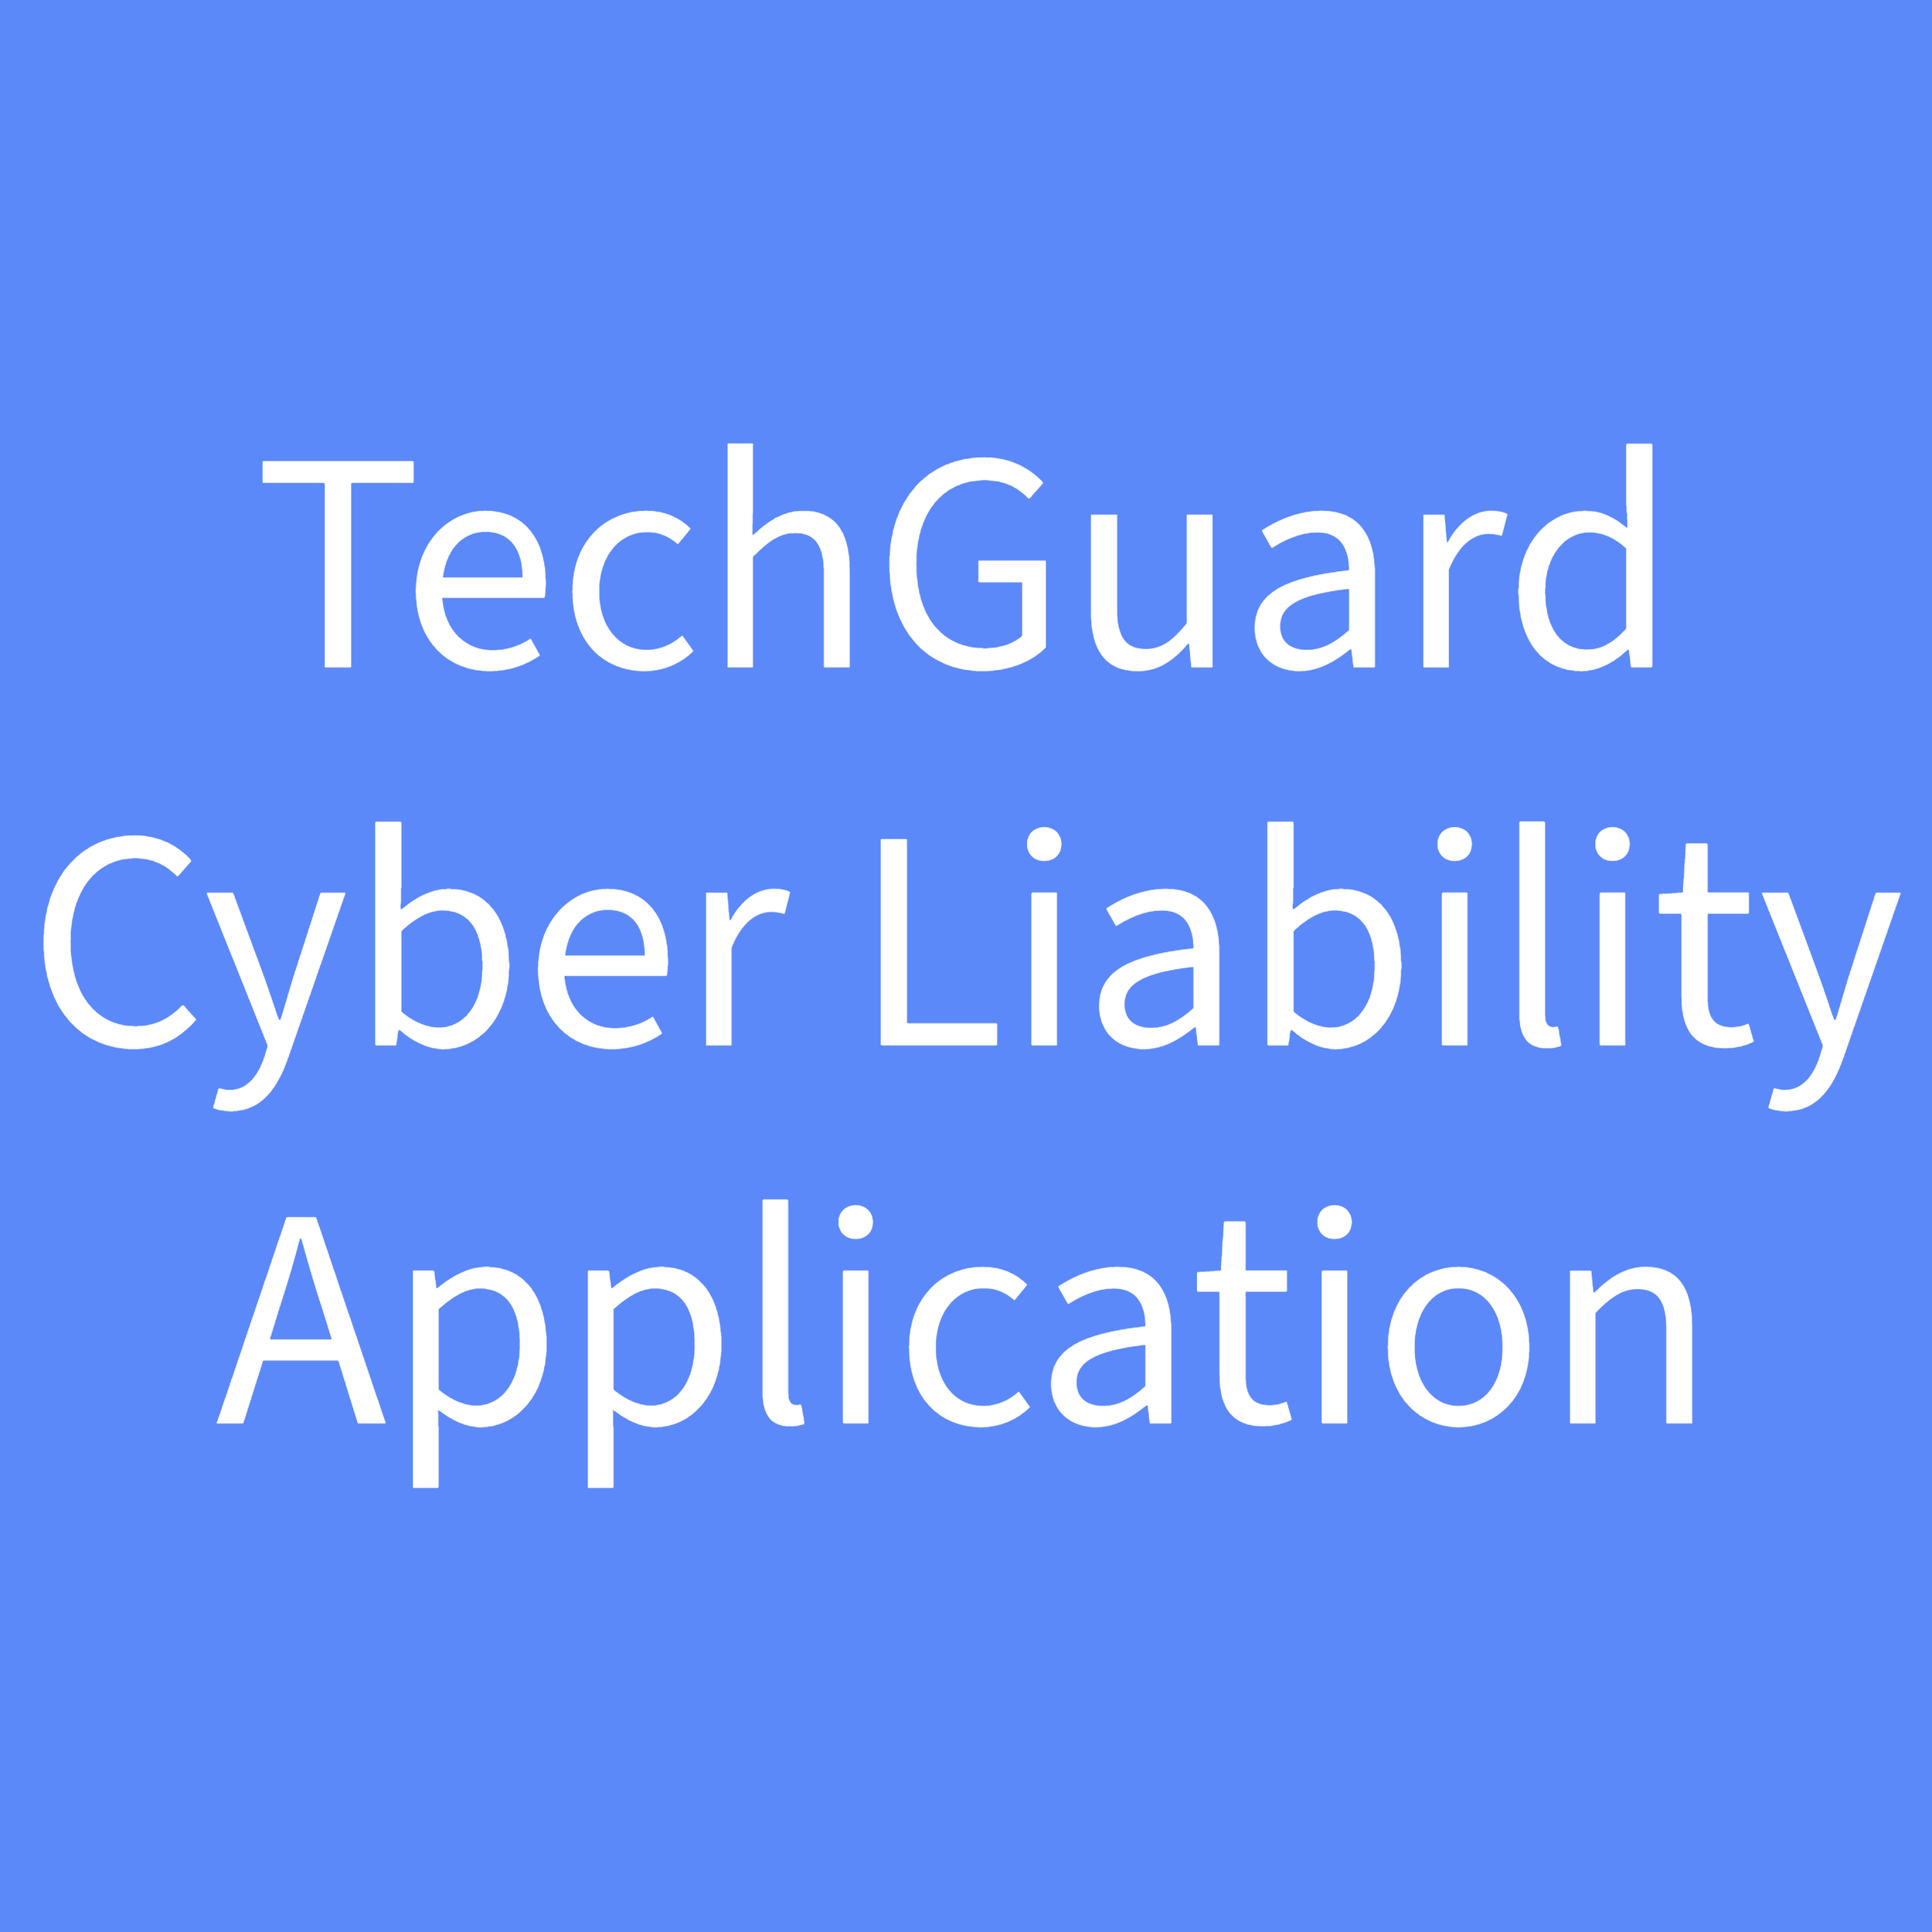 Cyber-Network Security & Privacy Liability & Technology Risks-3-TechGuard Cyber Liability Application .png